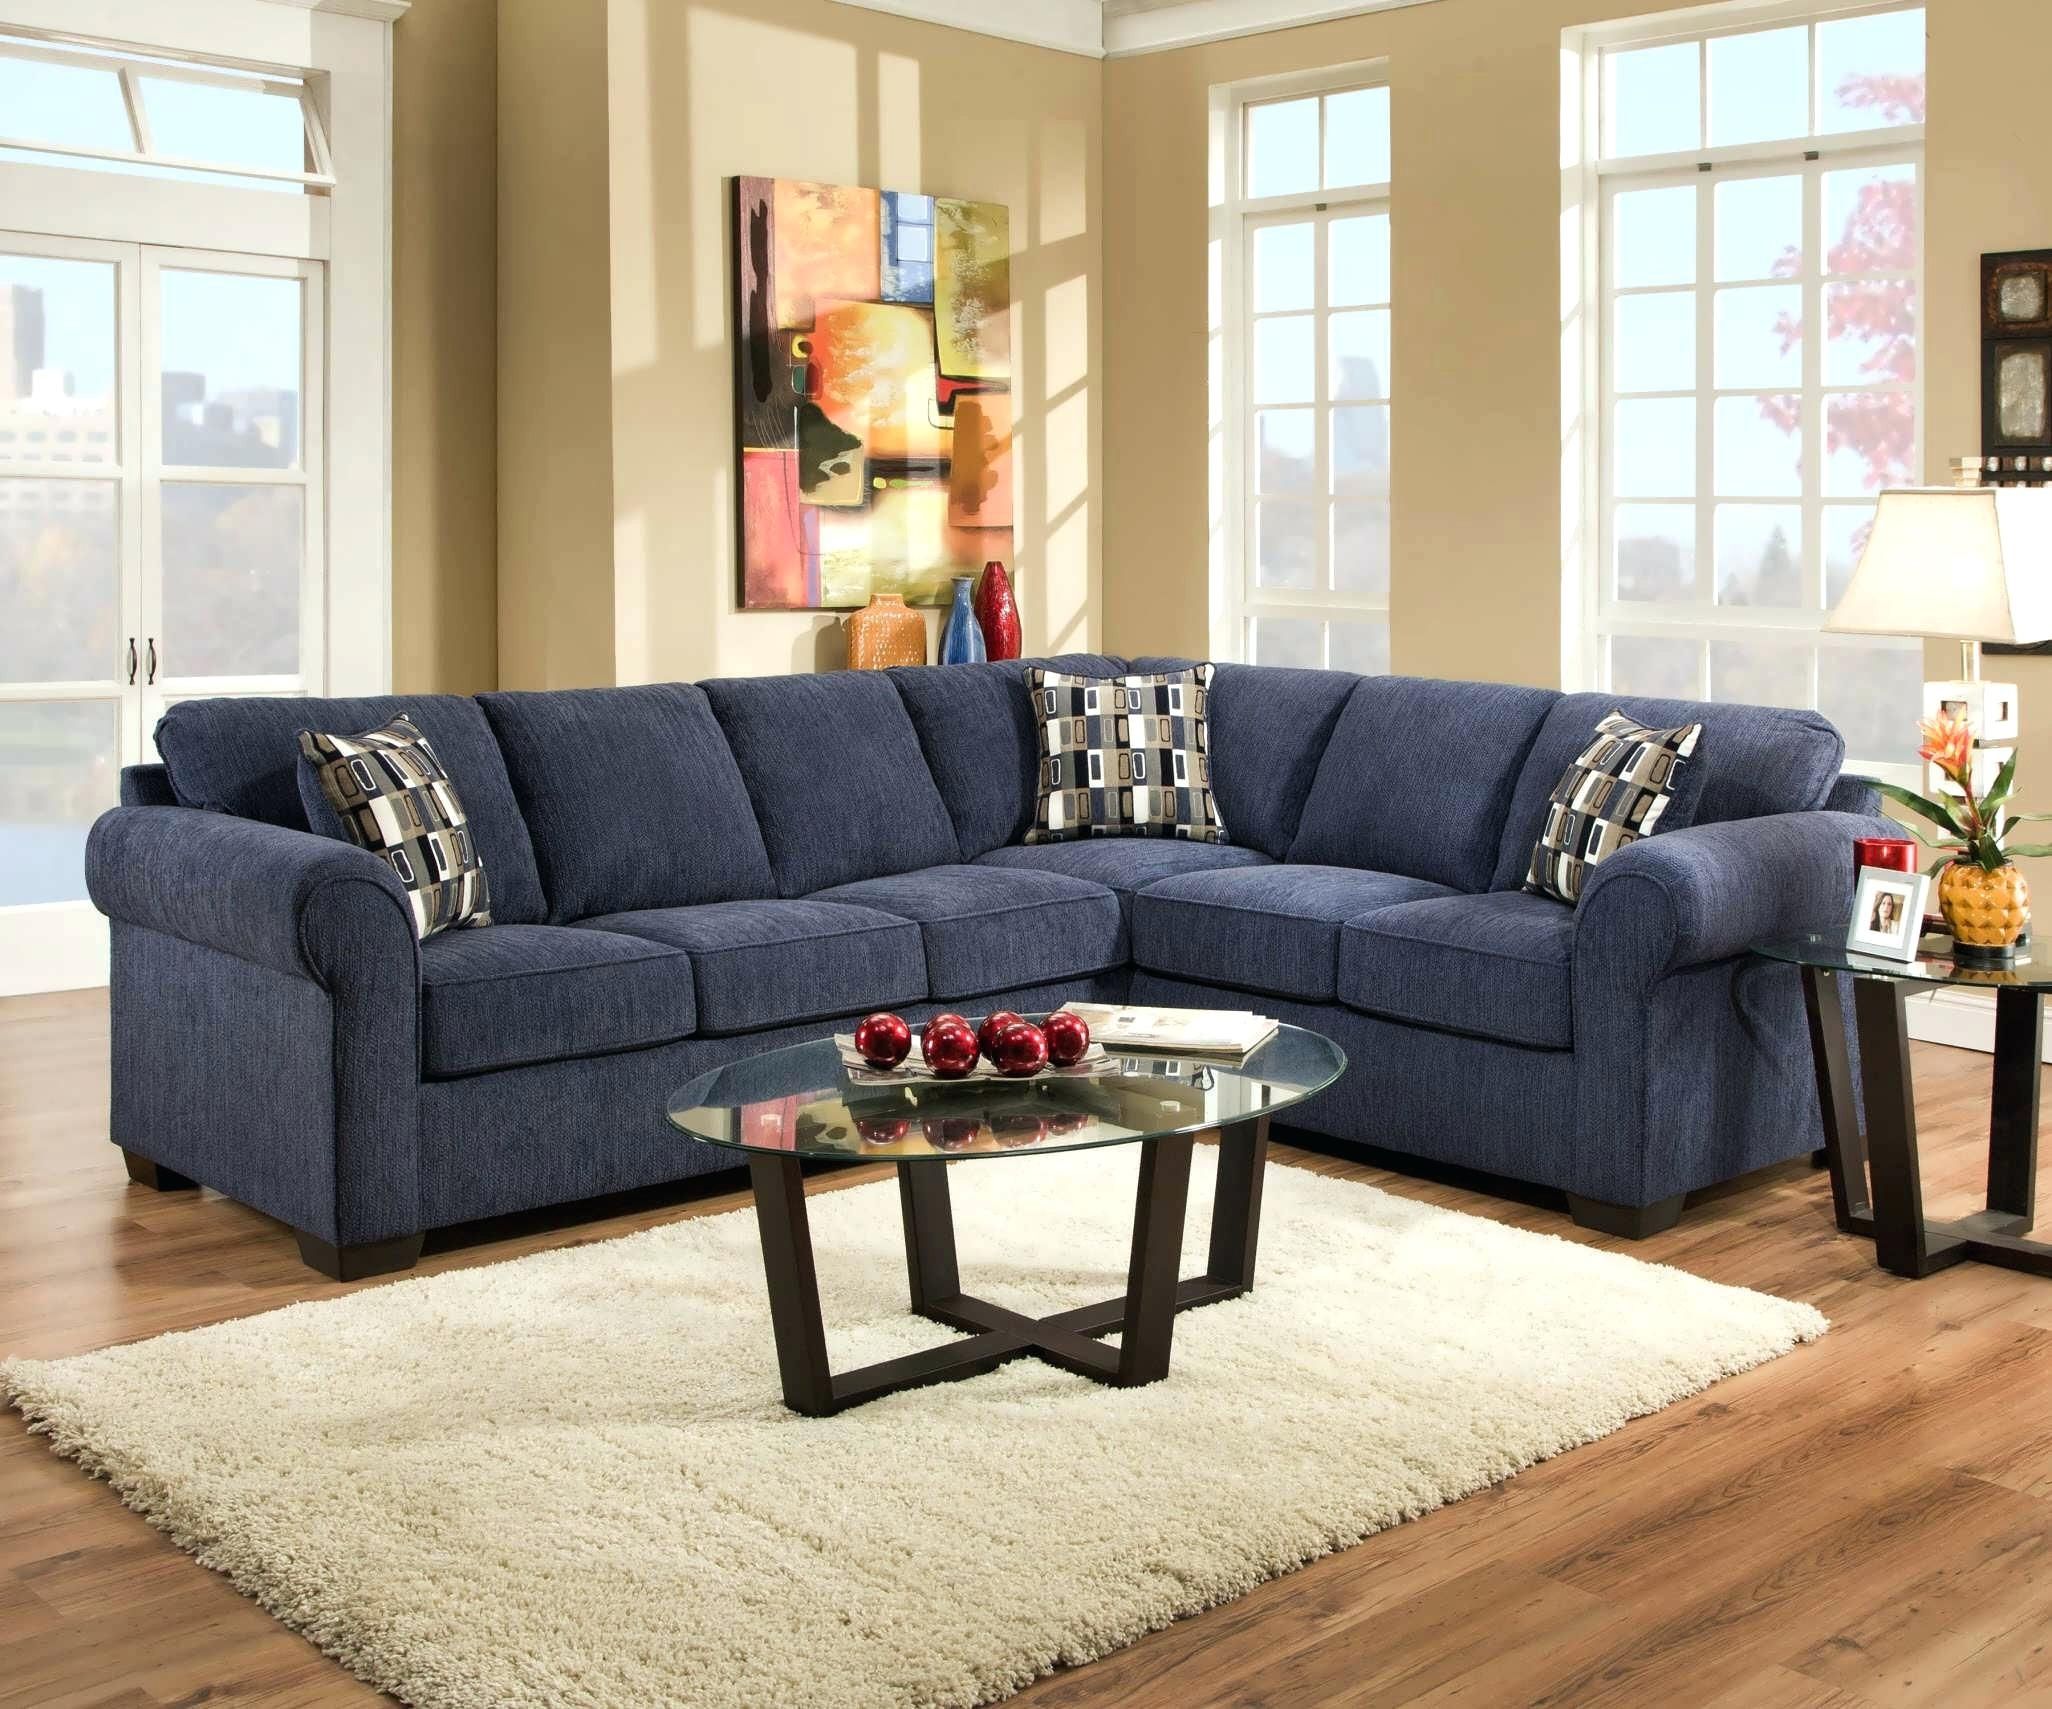 Sectional Sofas For Sale Sa Sofa Liquidation Toronto Canada In Pertaining To Canada Sale Sectional Sofas 